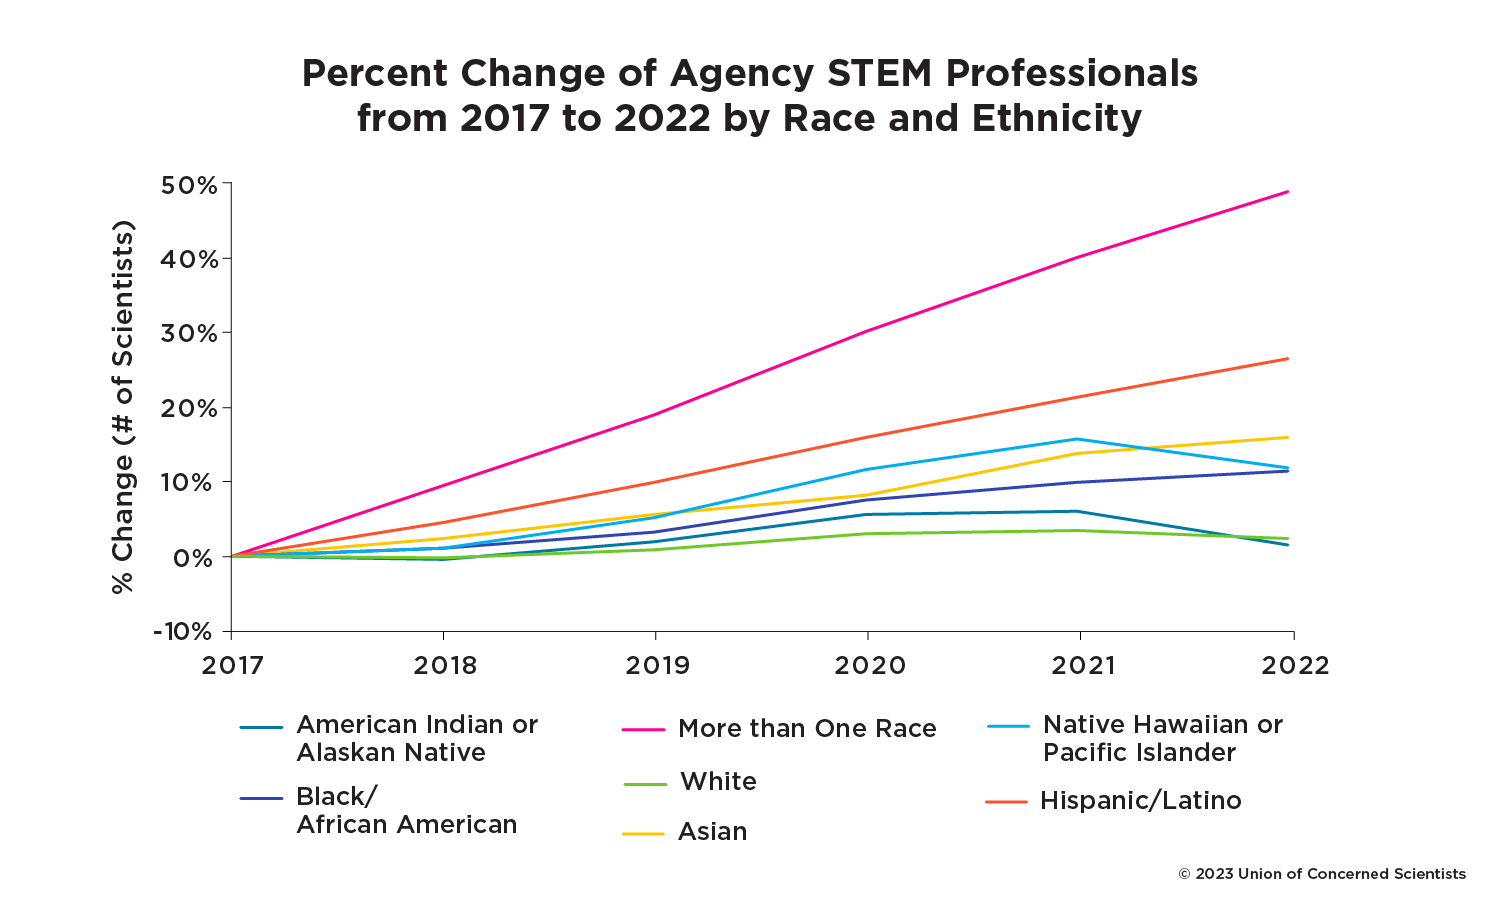 This graph shows the percent change of STEM professionals in the federal workforce by race and ethnicity between 2017 and 2022